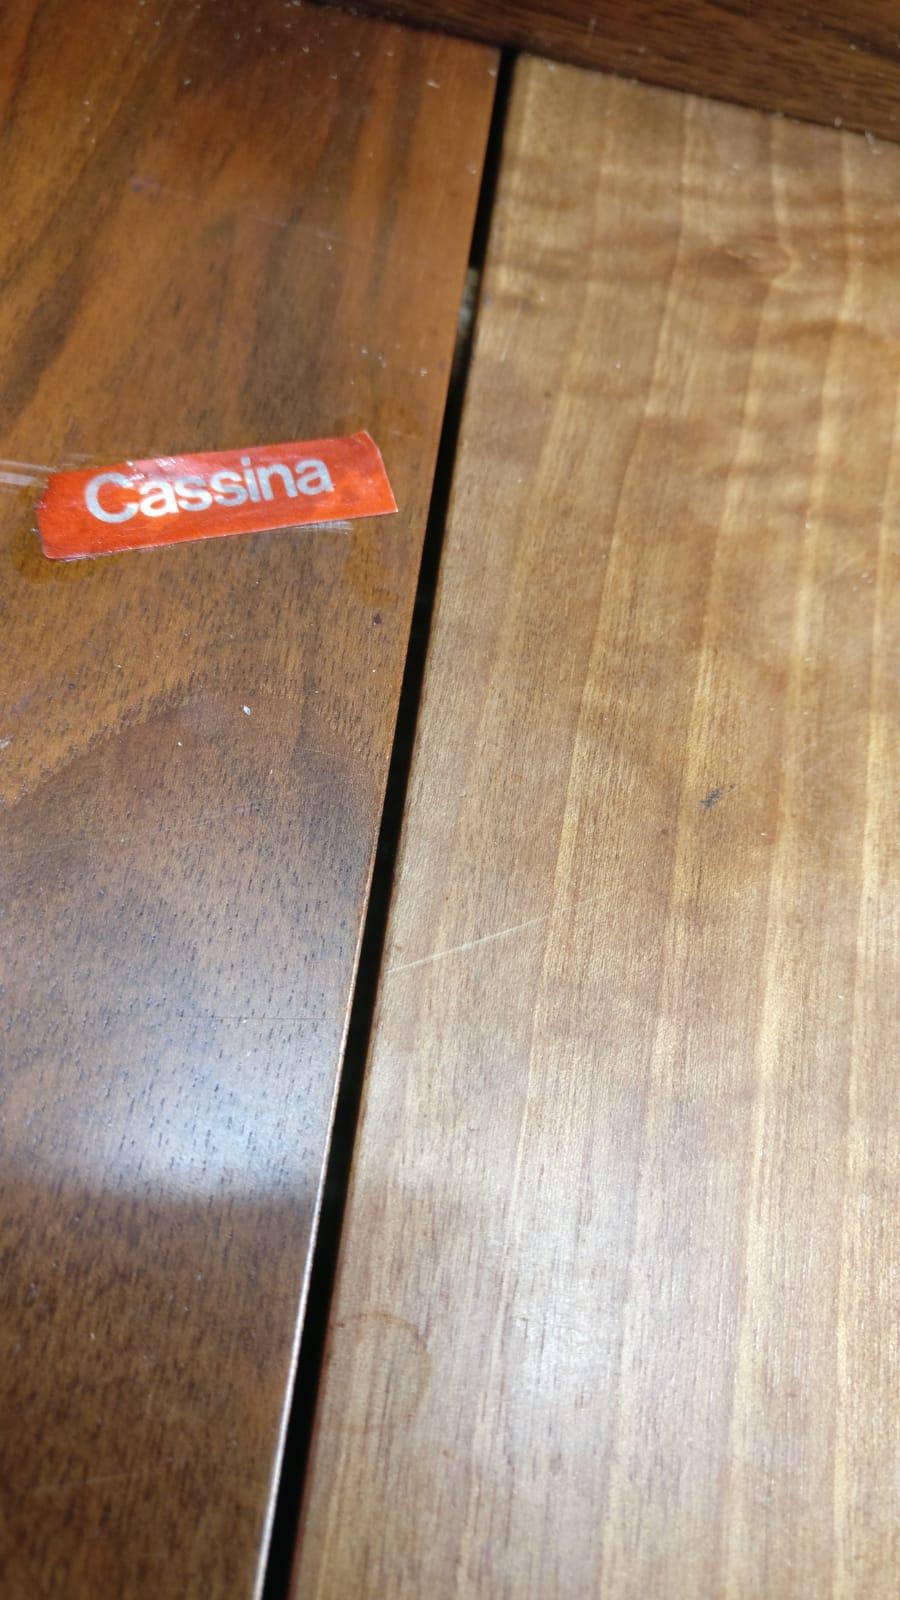 Walnut Basilica Table by Mario Bellini Early Edition 1981 for Cassina